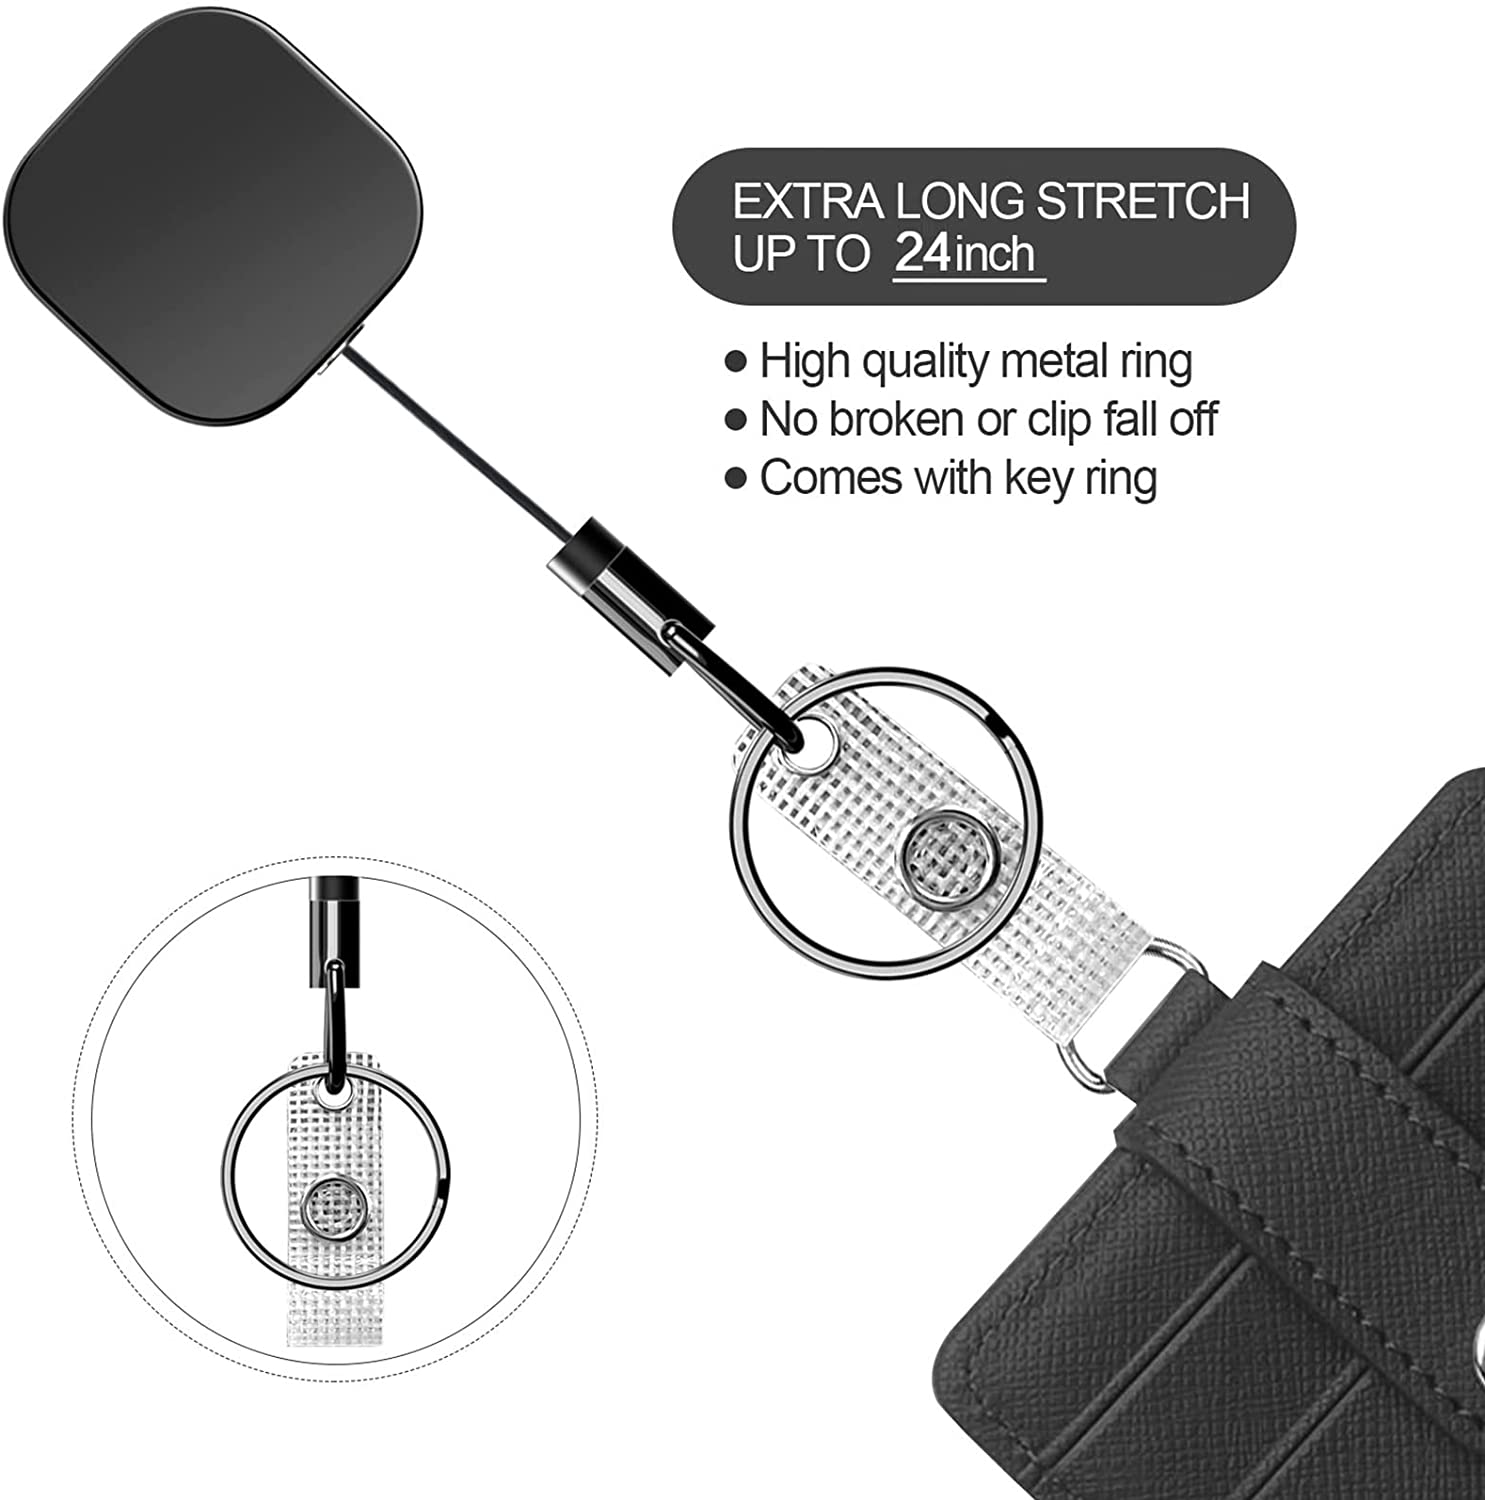 Super Heavy Duty Sidekick Retractable Badge and Key Reel - Carabiner Clip -  with Three Card ID Badge Holder (Holds 3 Badges) by Specialist ID 